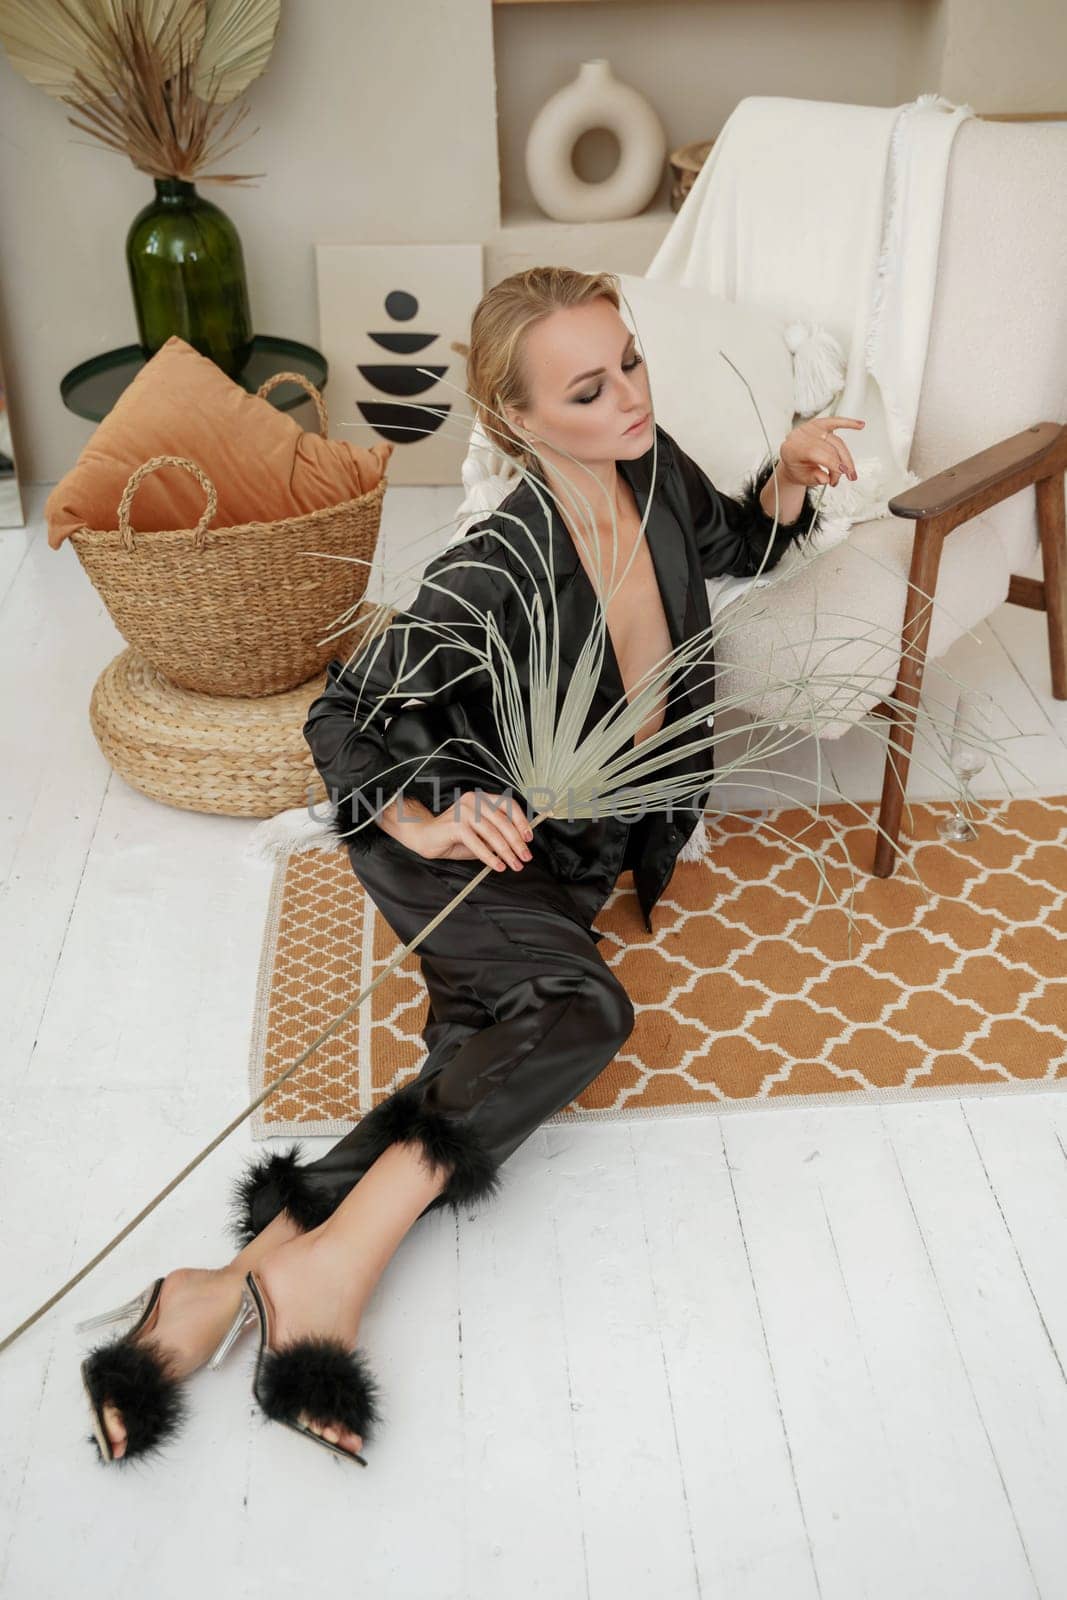 Woman glamorous pajamas. A beautiful blonde in black pajamas is sitting relaxed in a chair in black pajamas with feathers. Beige stones are all over the interior